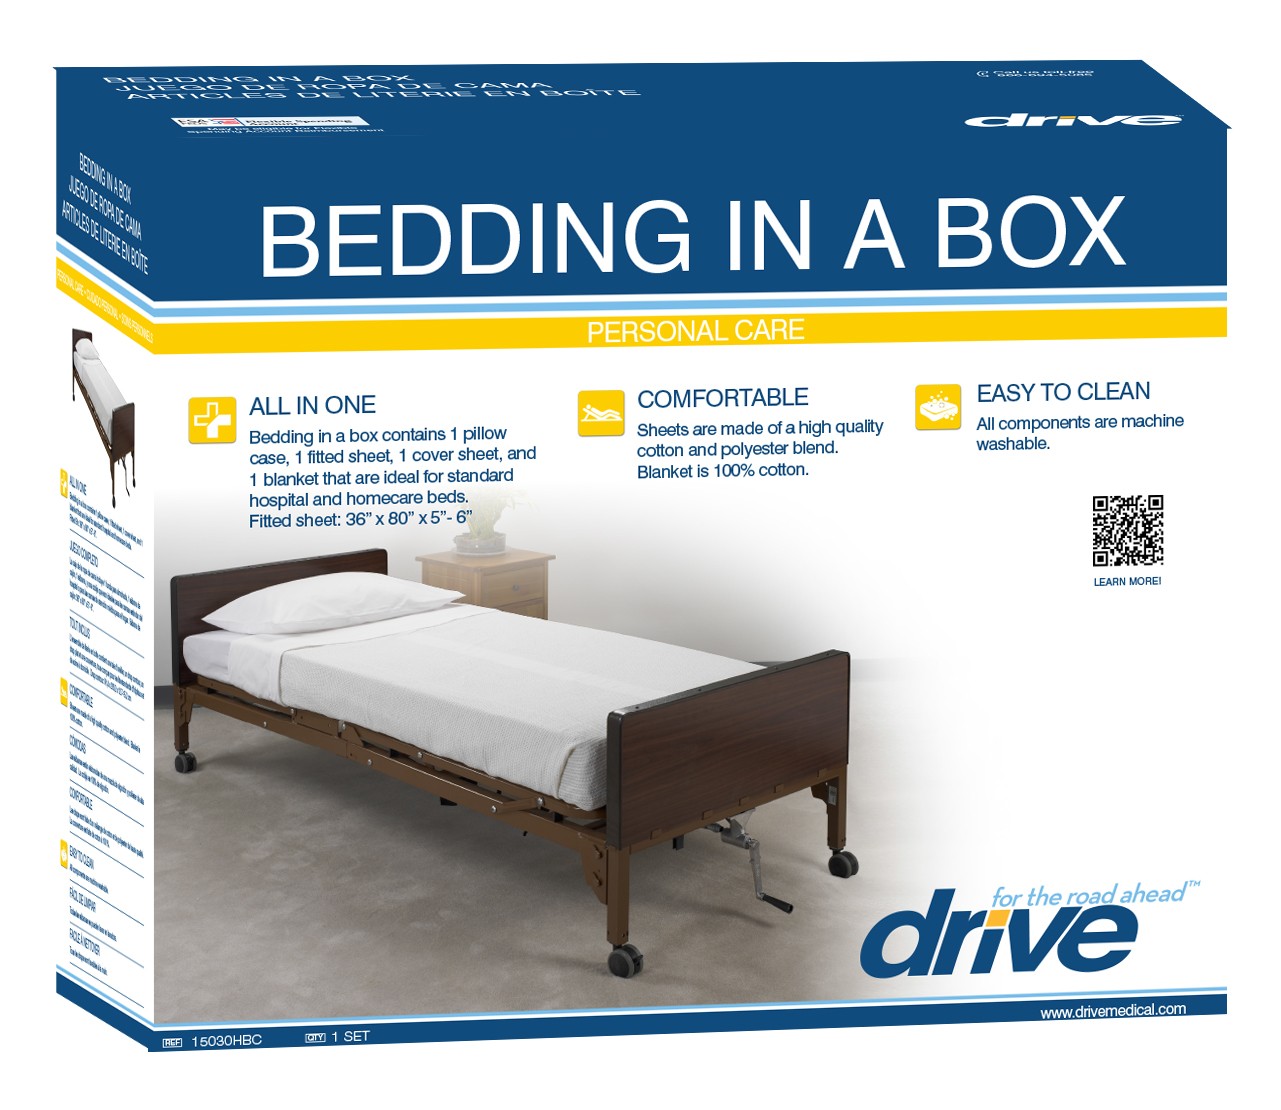 BEDDING IN A BOX PACKAGING